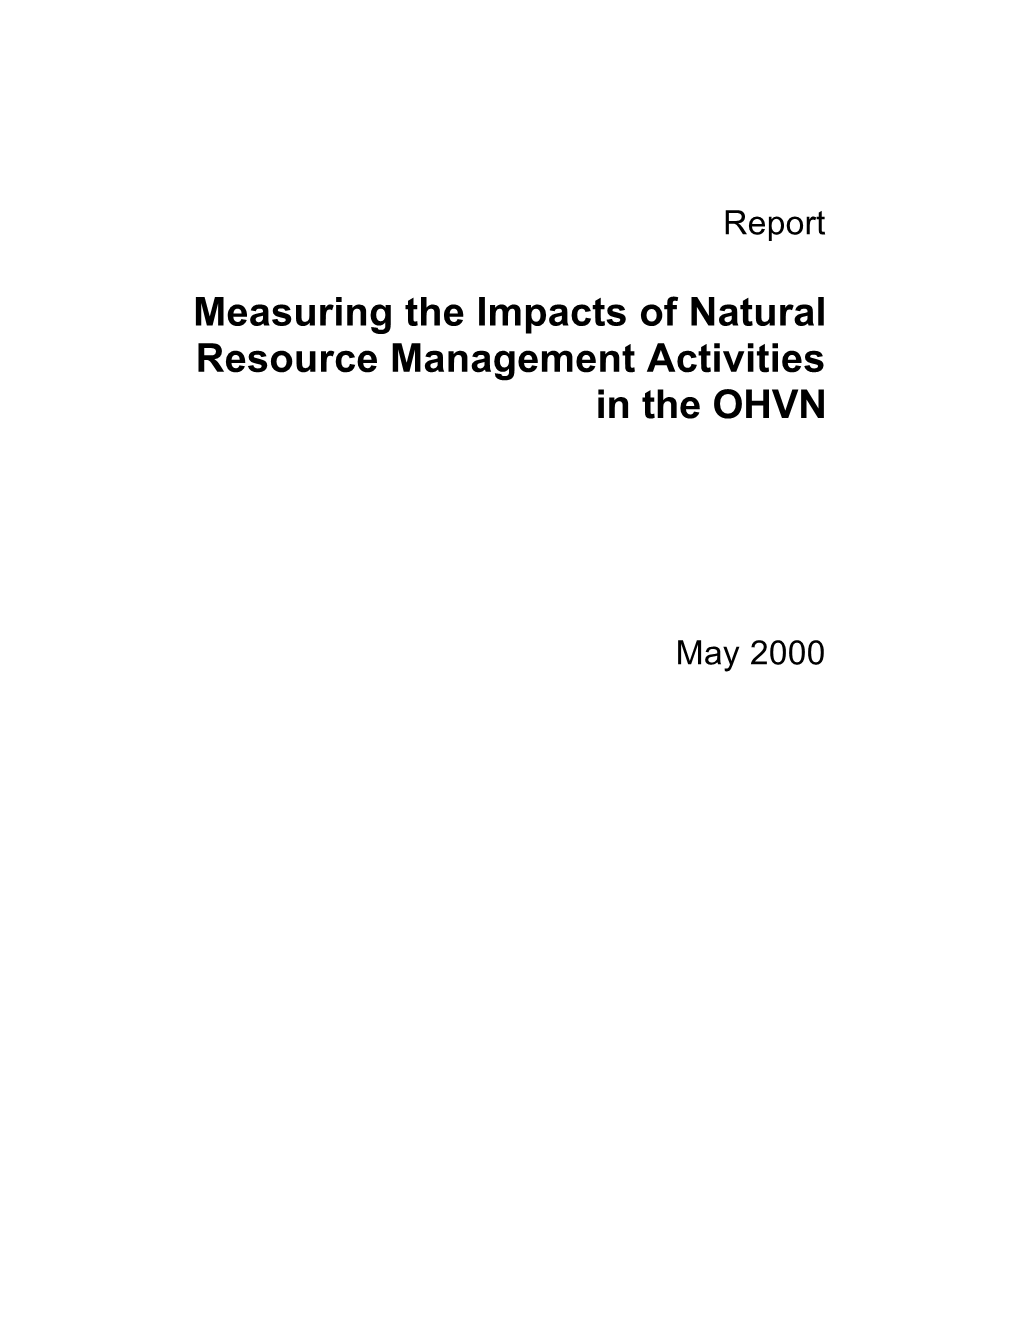 Measuring the Impacts of Natural Resource Management Activities in the OHVN